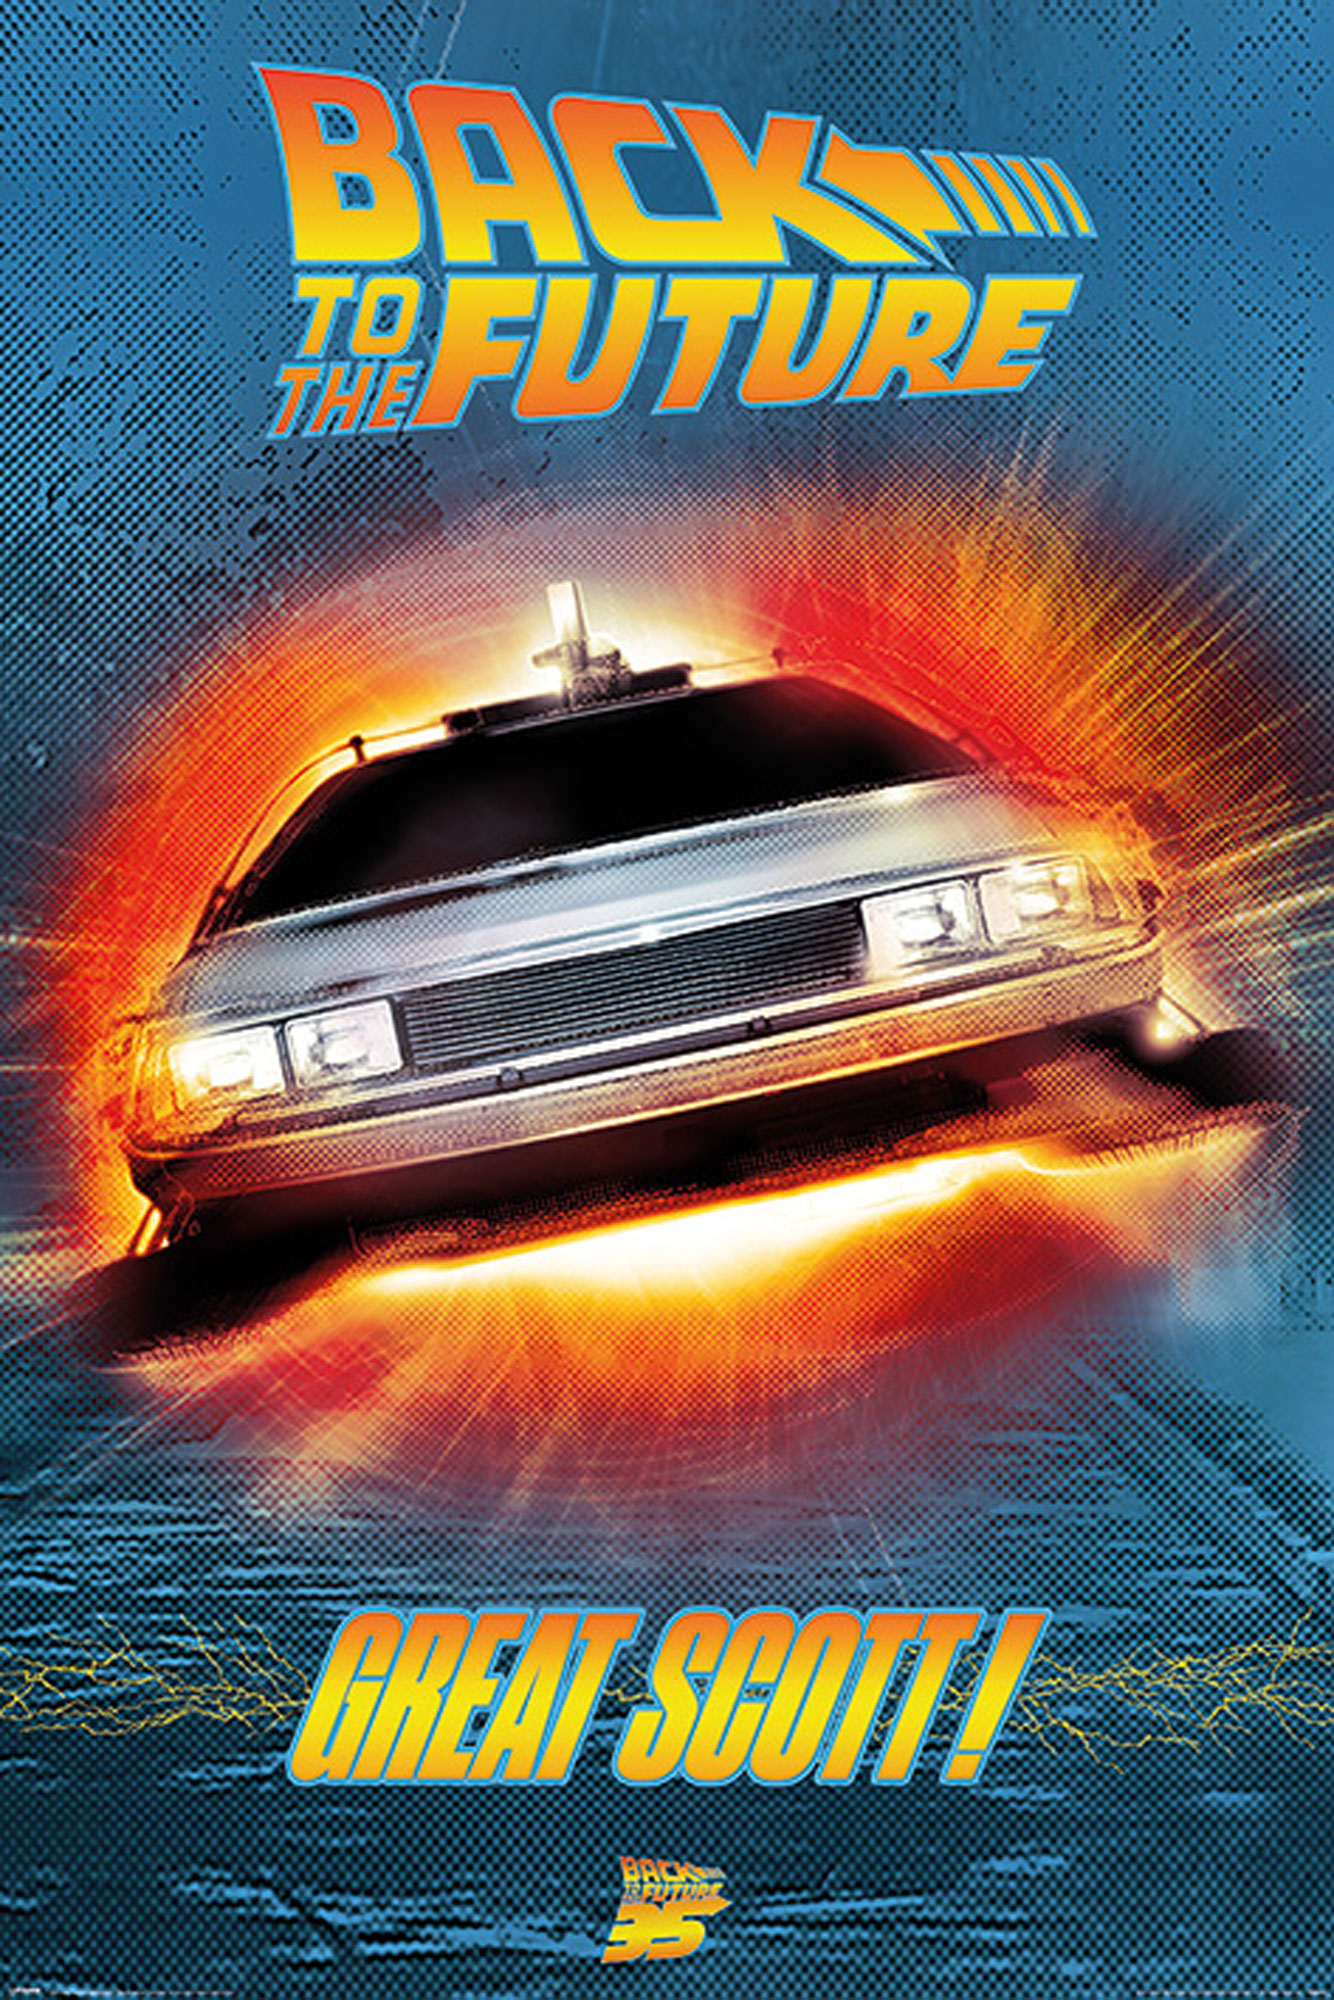 The Scott! Back To Future - Great